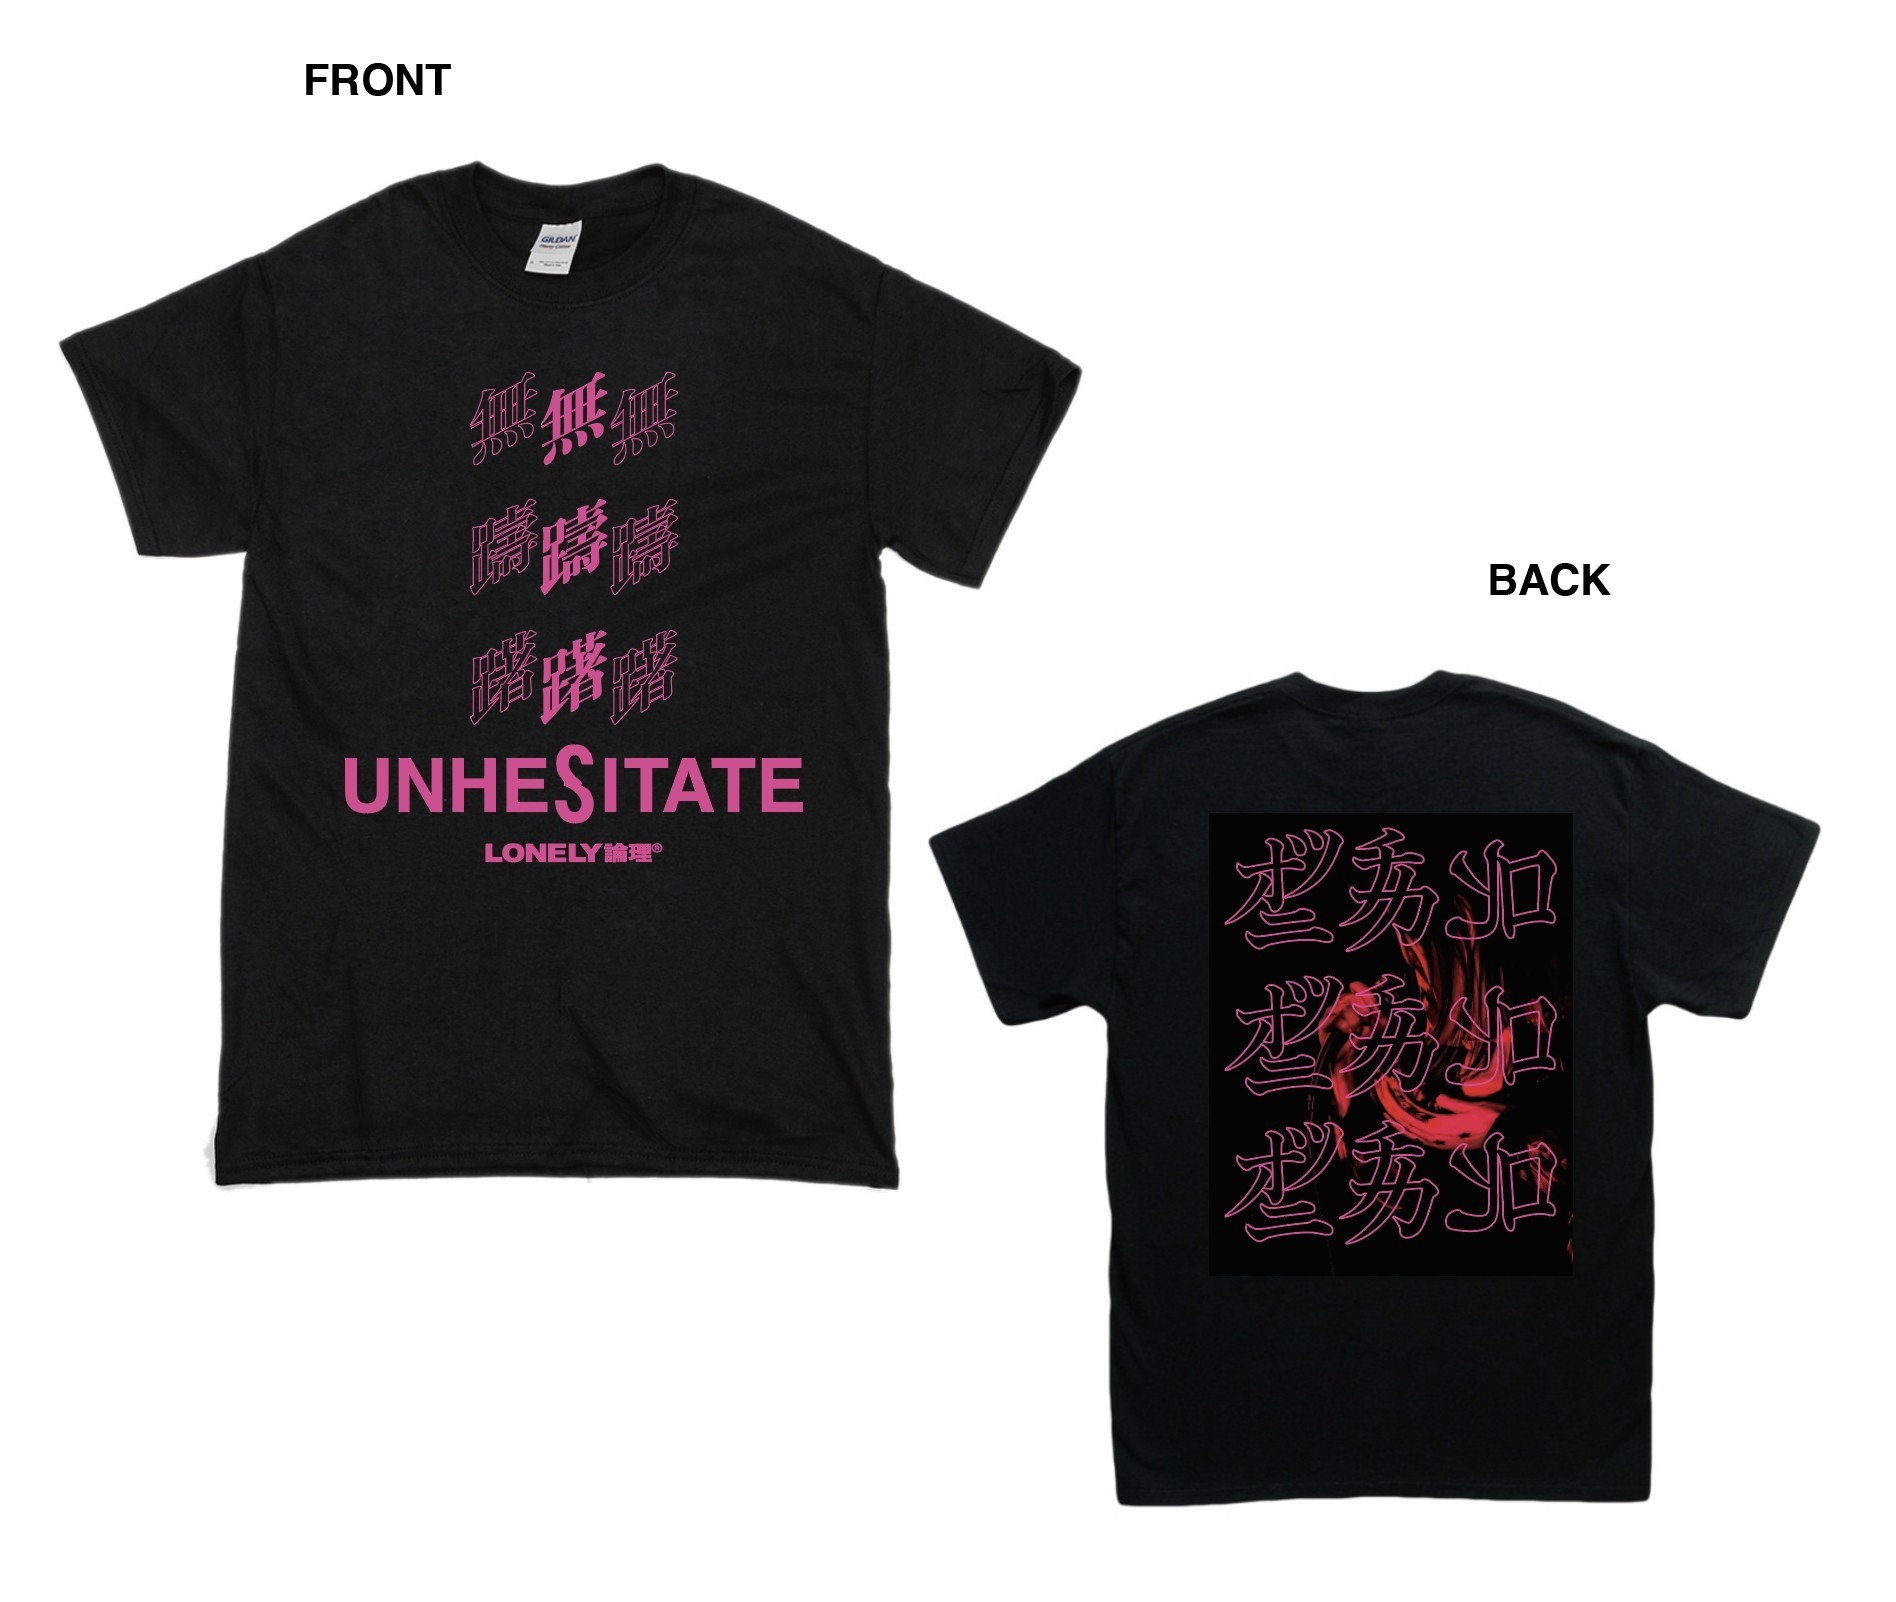 T-shirt／LONELY論理COLLABORATION | ONITSUKA CHIHIRO ONLINE SHOP